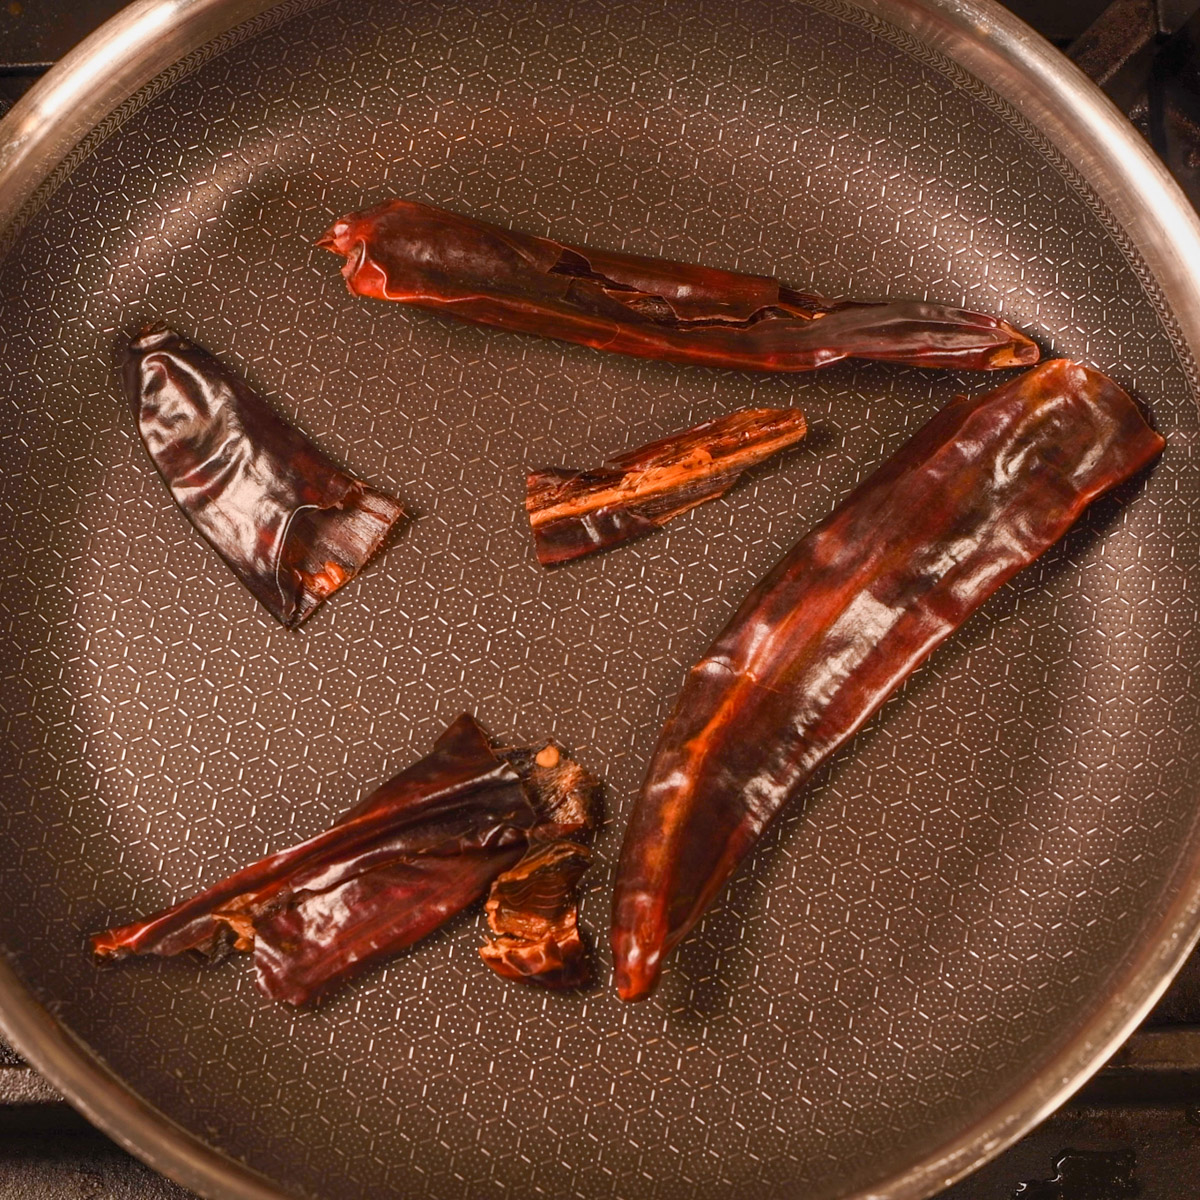 Toast dried chiles in a hot skillet over medium heat.